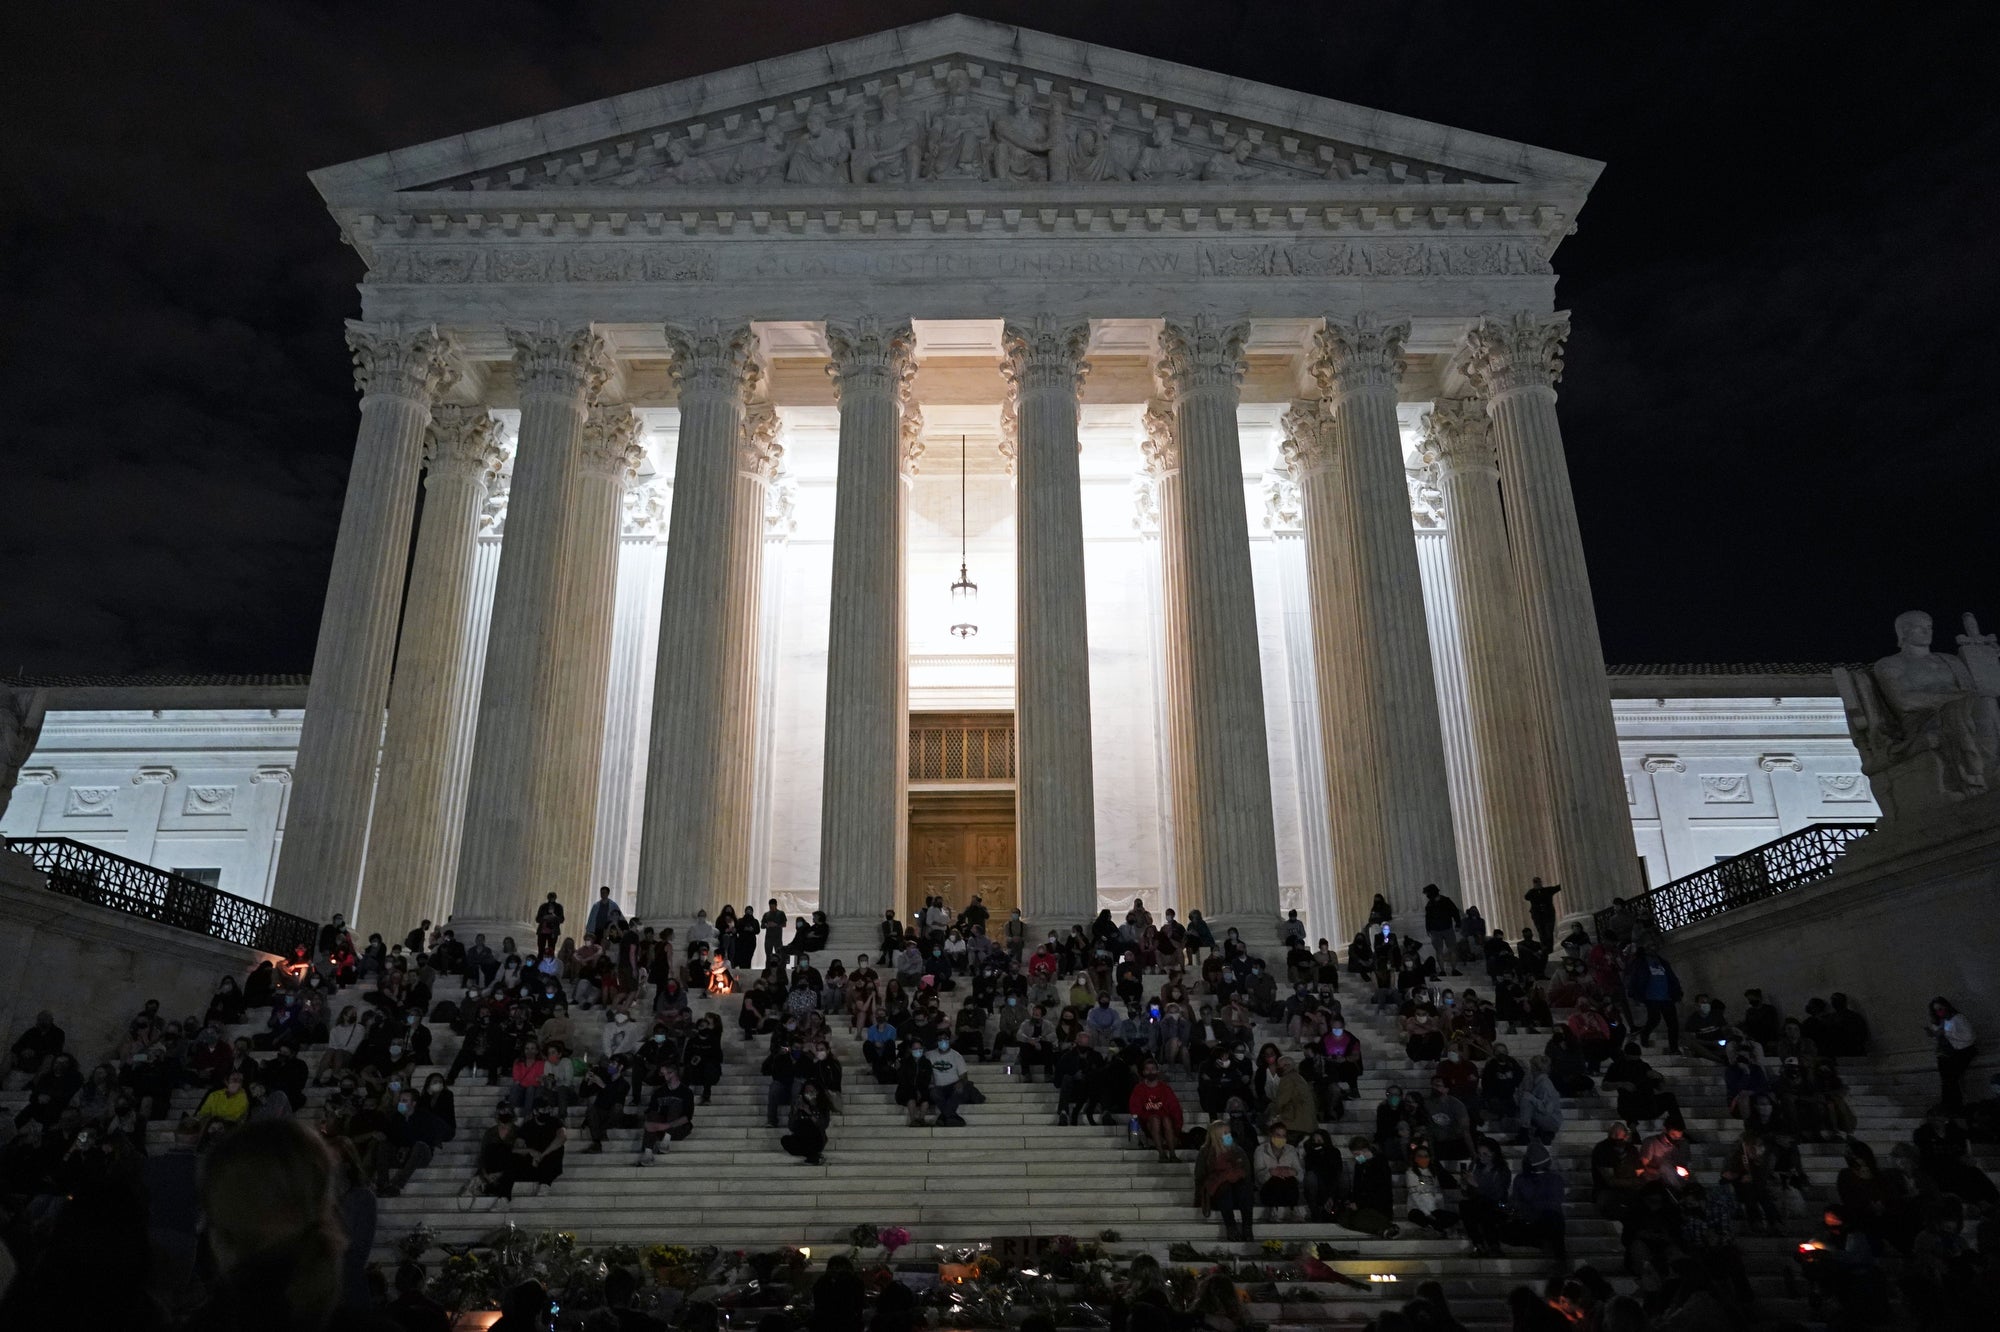 Photo of people gathered at a makeshift memorial for late Justice Ruth Bader Ginsburg on the steps of the Supreme Court building in Washington, D.C., on September 18, 2020.